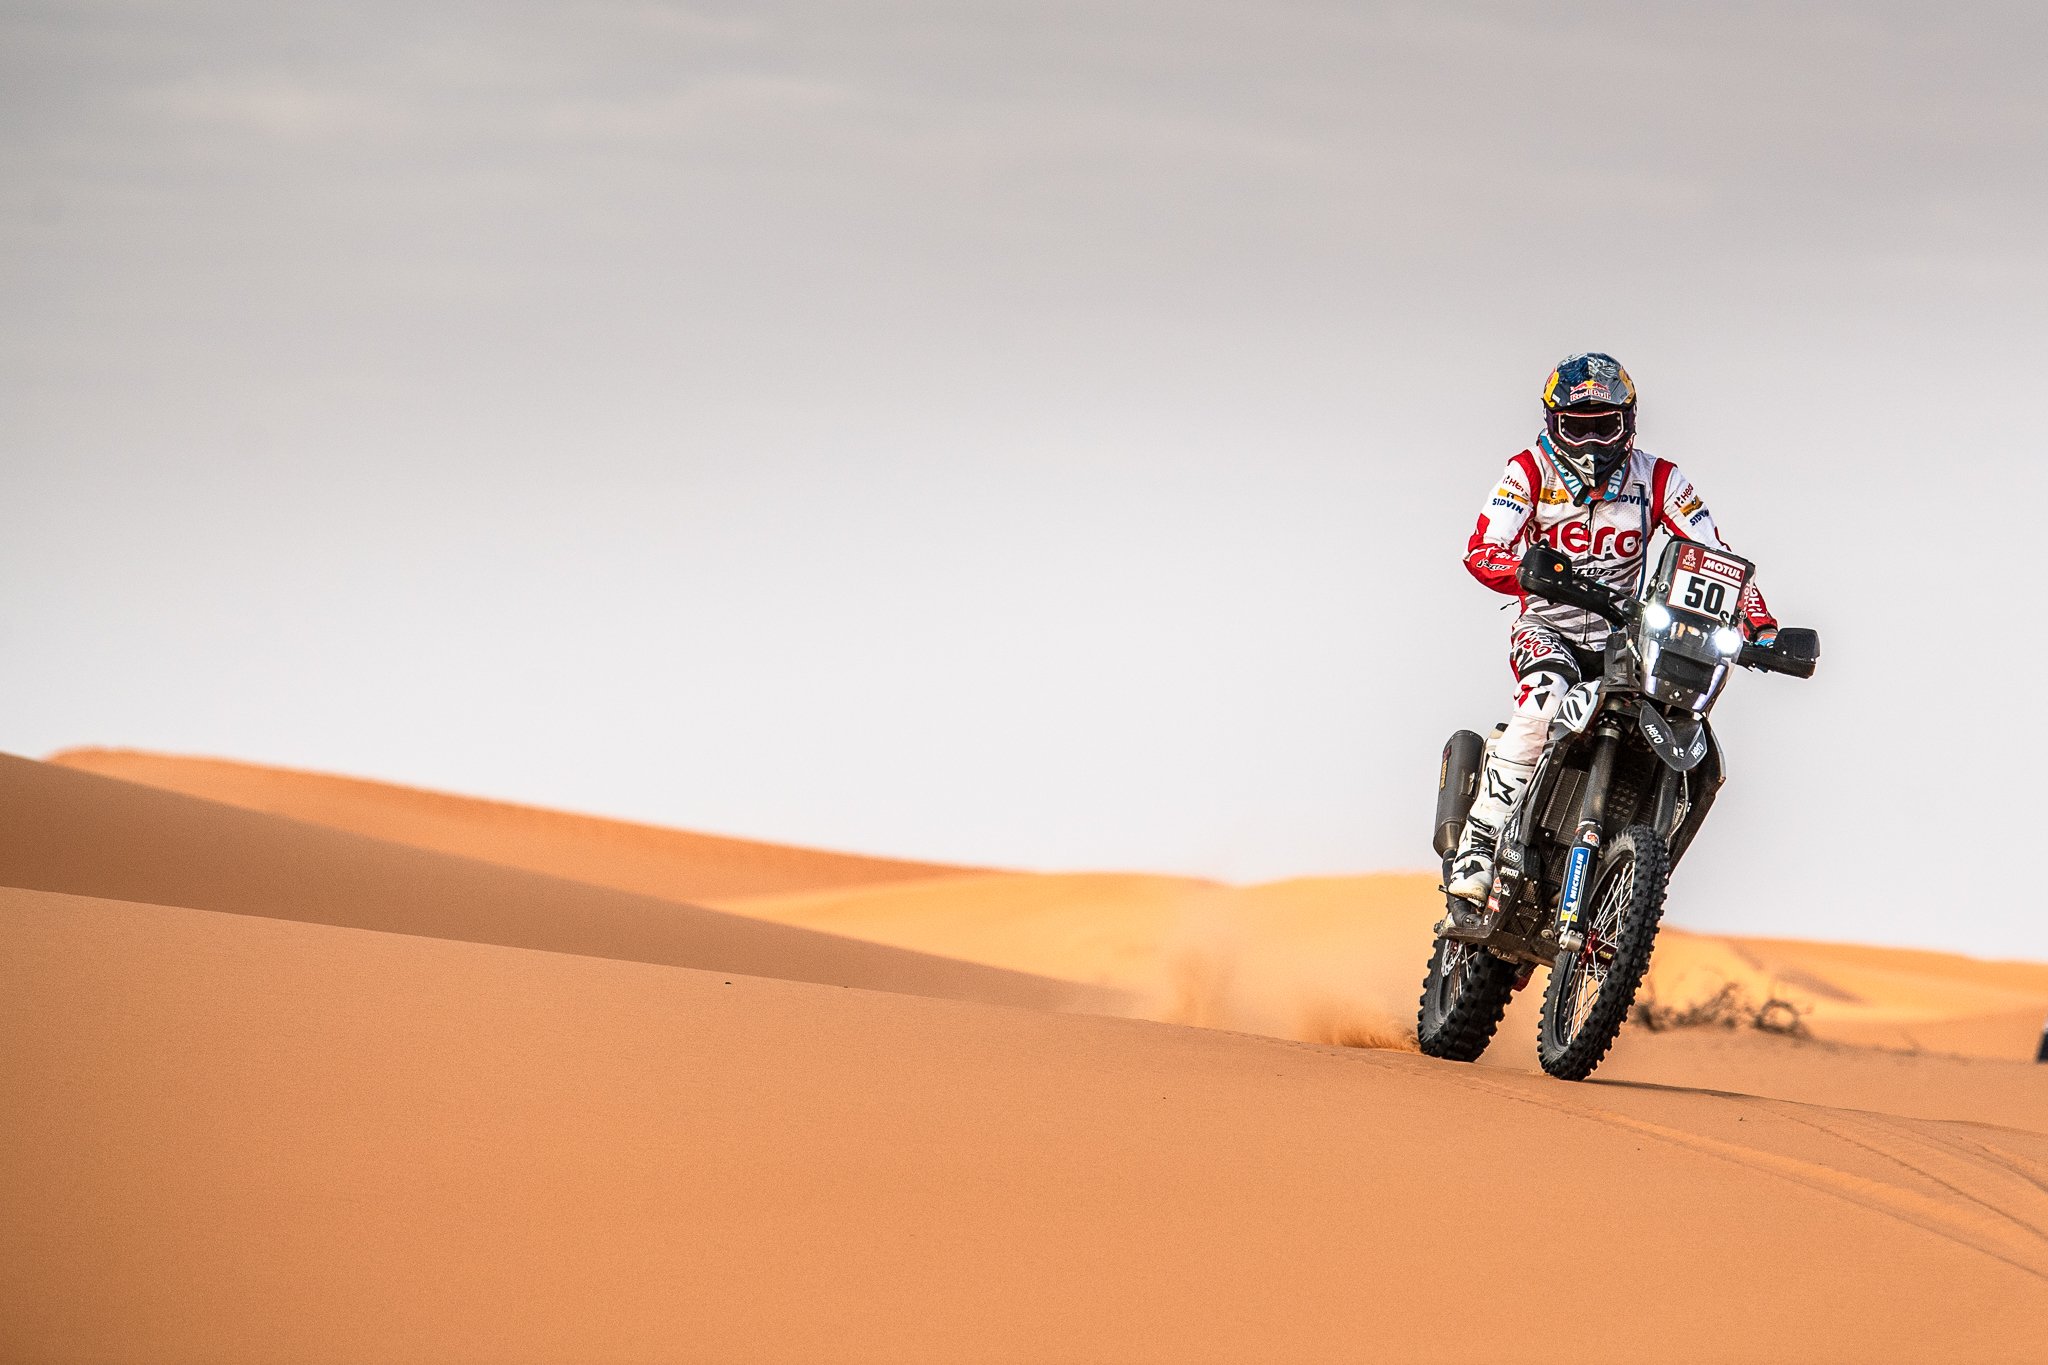 Photo of CS Santosh improves to 36th rank after a steady Stage 6 ride: #Dakar2020